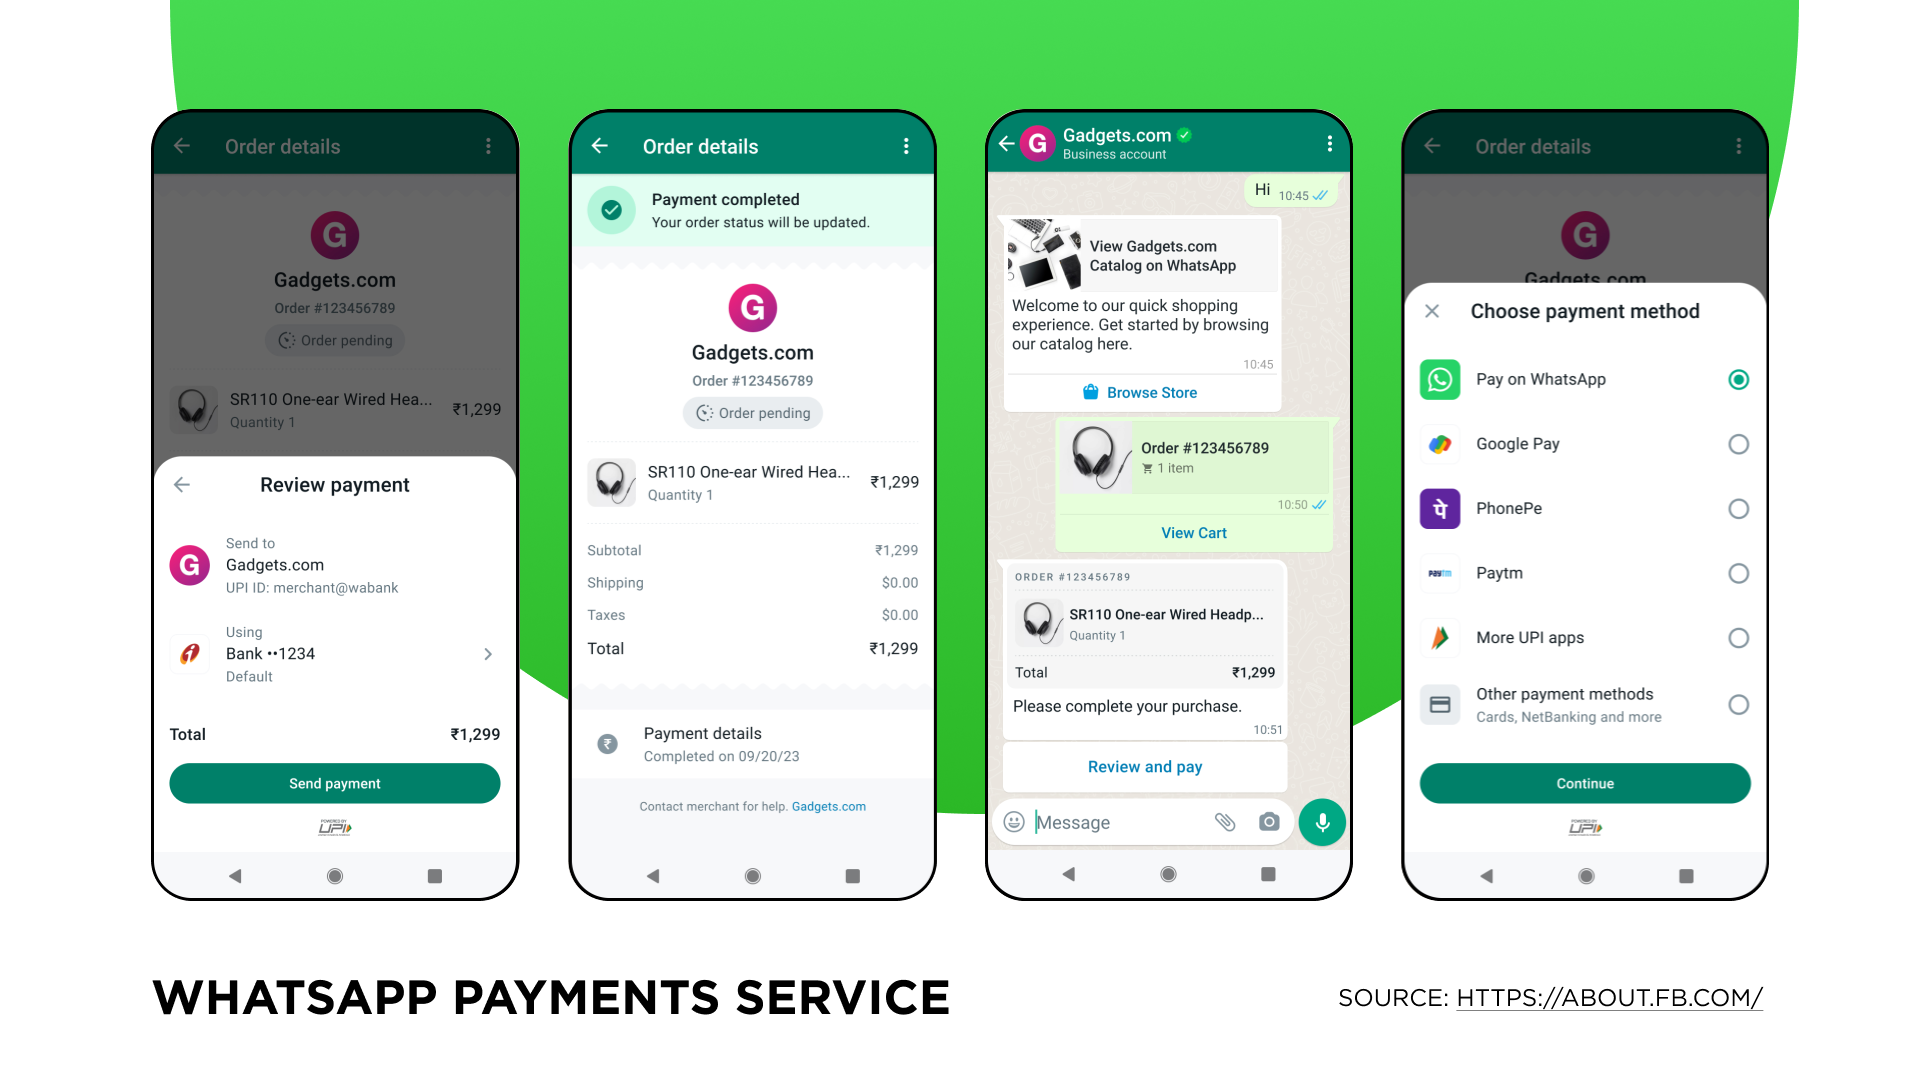 WhatsApp Payments Service